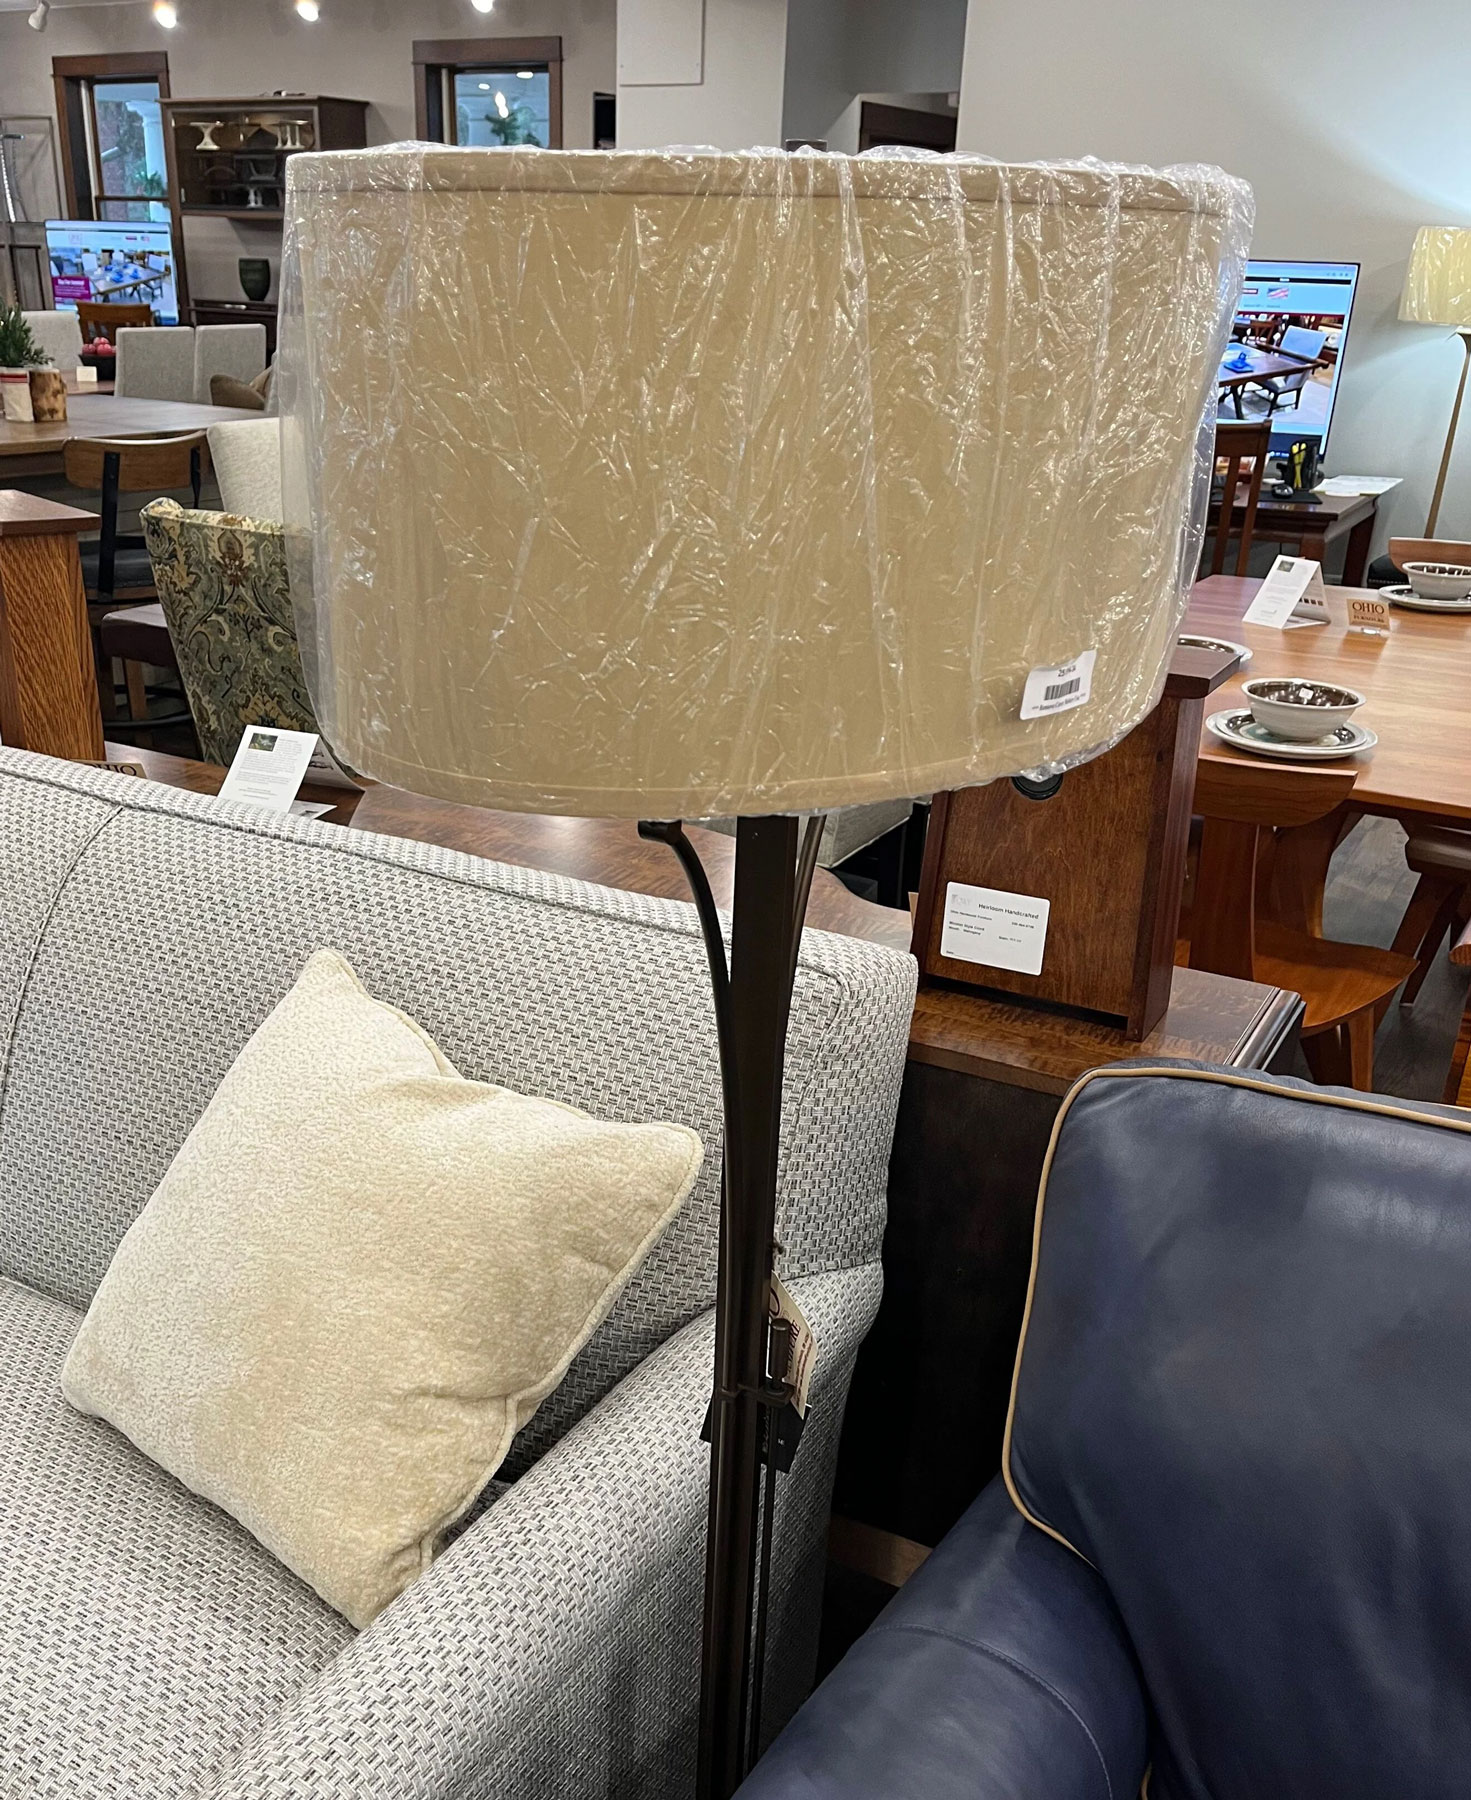 Hubbardton Forge Contemporary Formae Floor Lamp with Doeskin Suede Shade